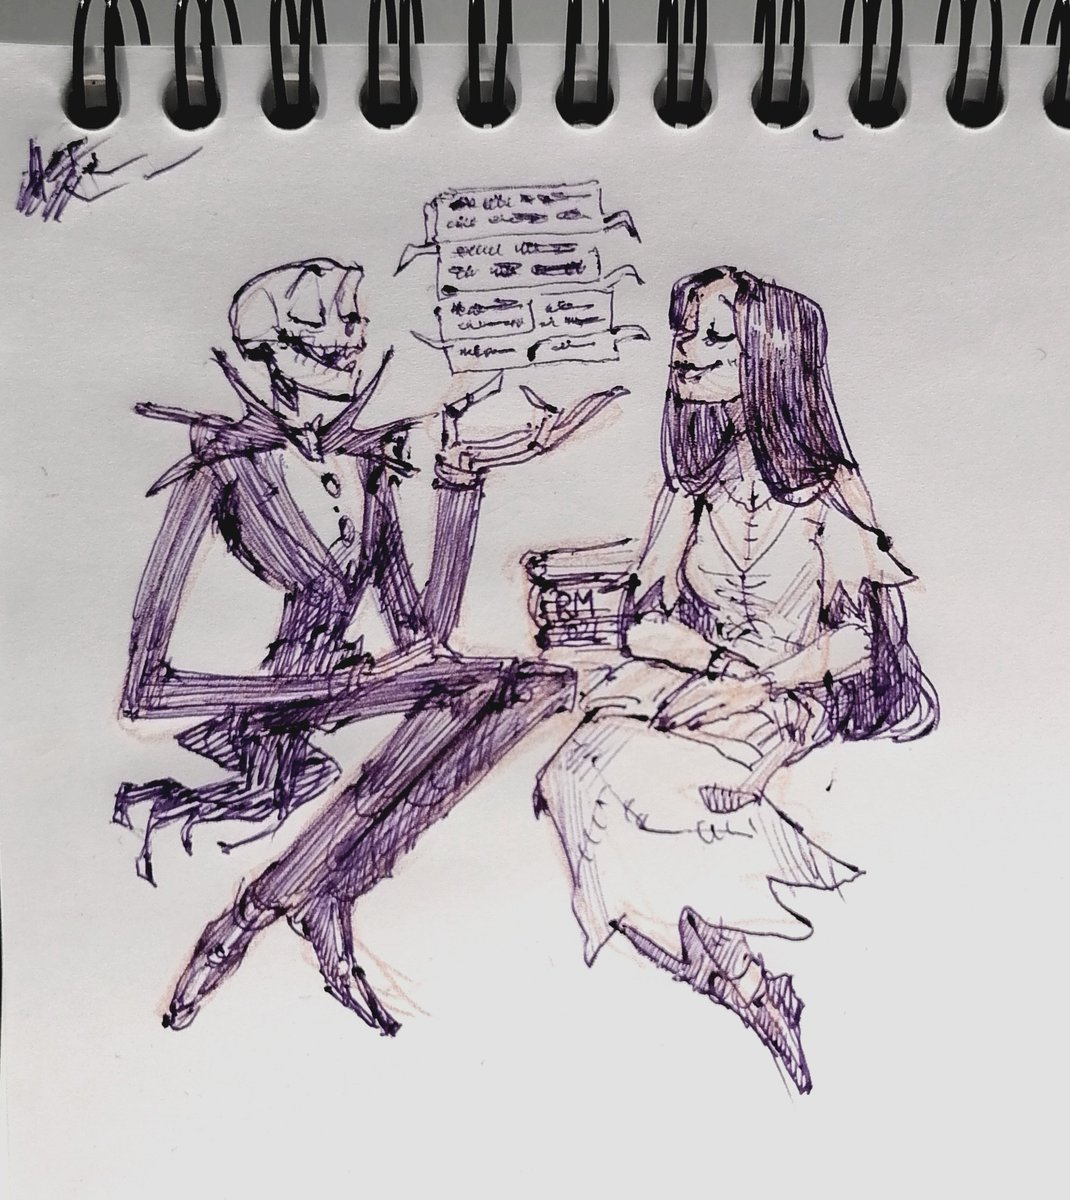 #thenightmarebeforechristmas #jackskellington #sally #jackandsally
My hc on one of things they would have done before movie's events (and before becoming dearest to each other). Reciting poems they had read. Since they are probably both bookworms with good taste.